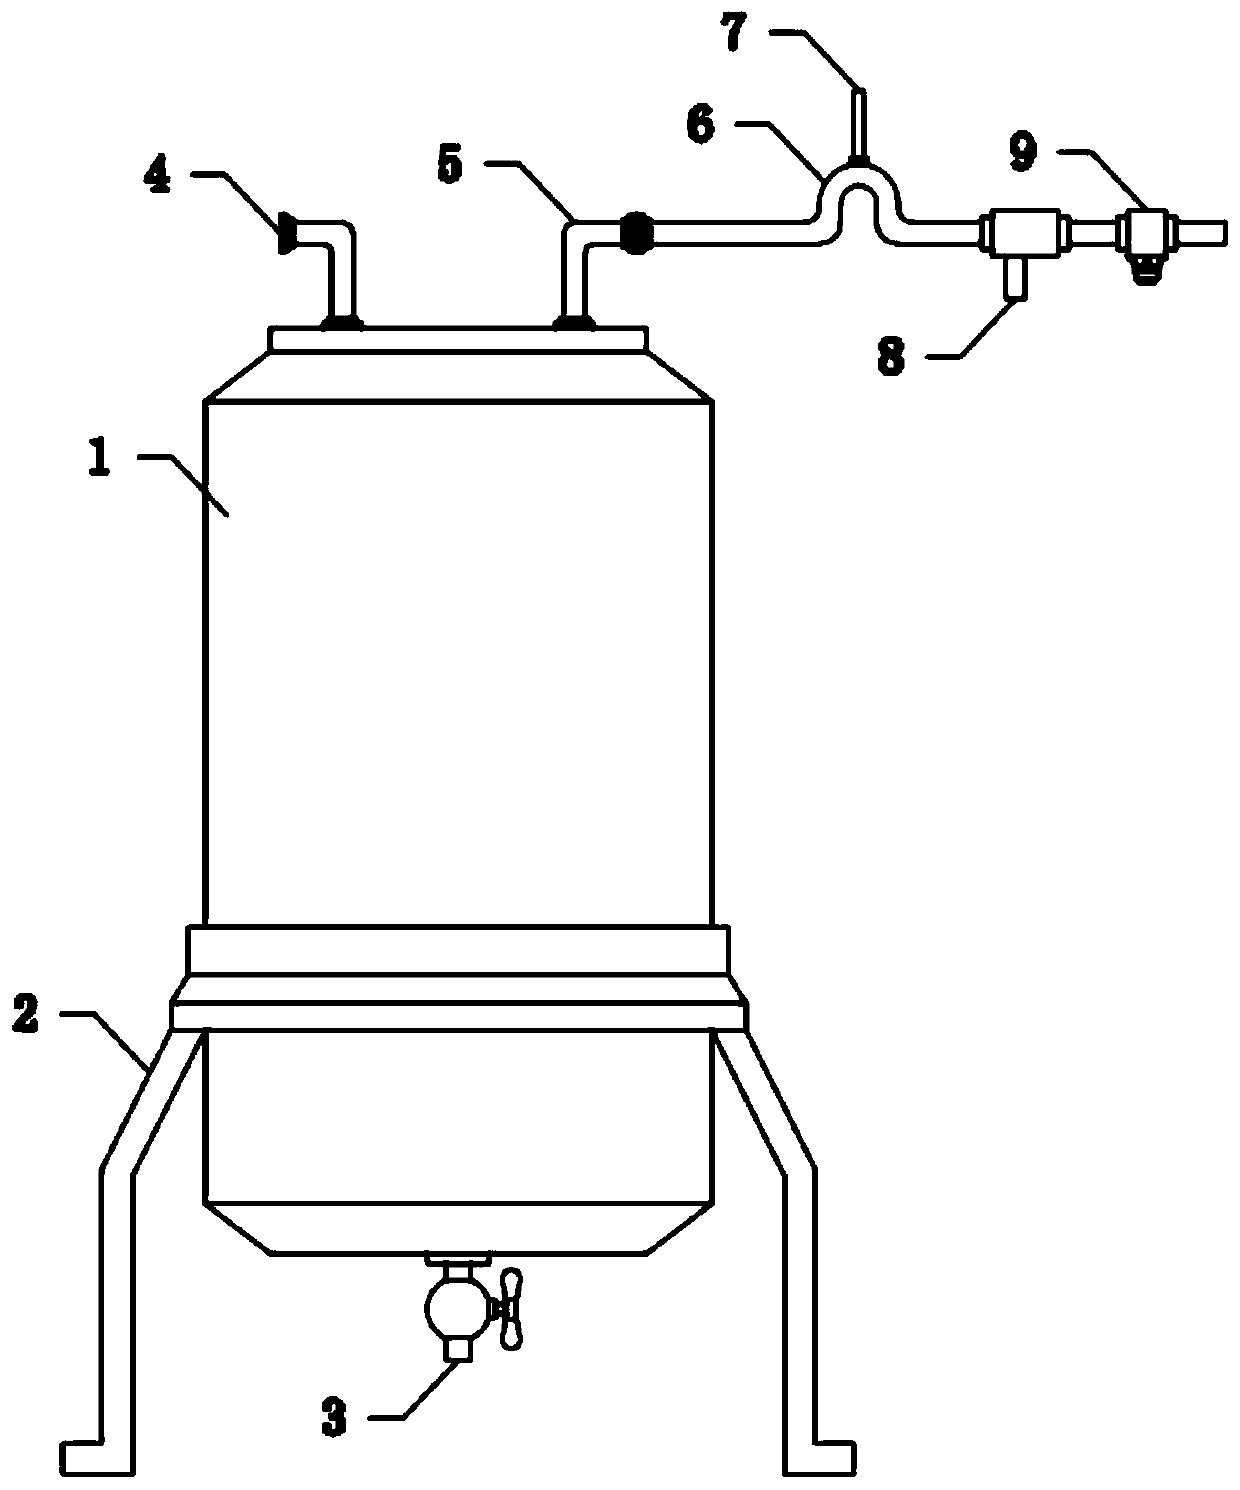 Ship fuel oil supply system with filtering function